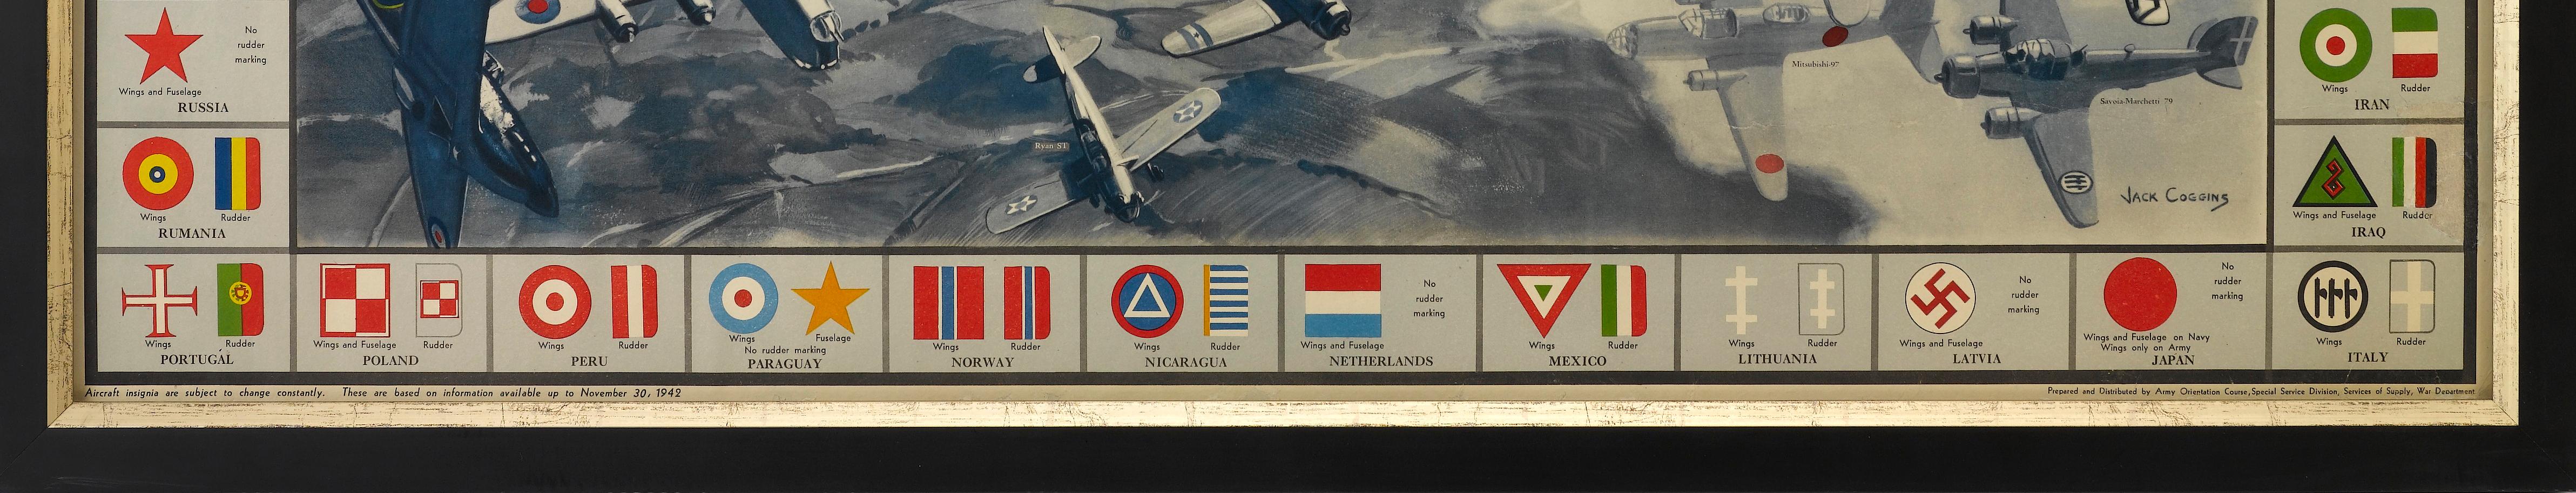 ww2 airplane posters